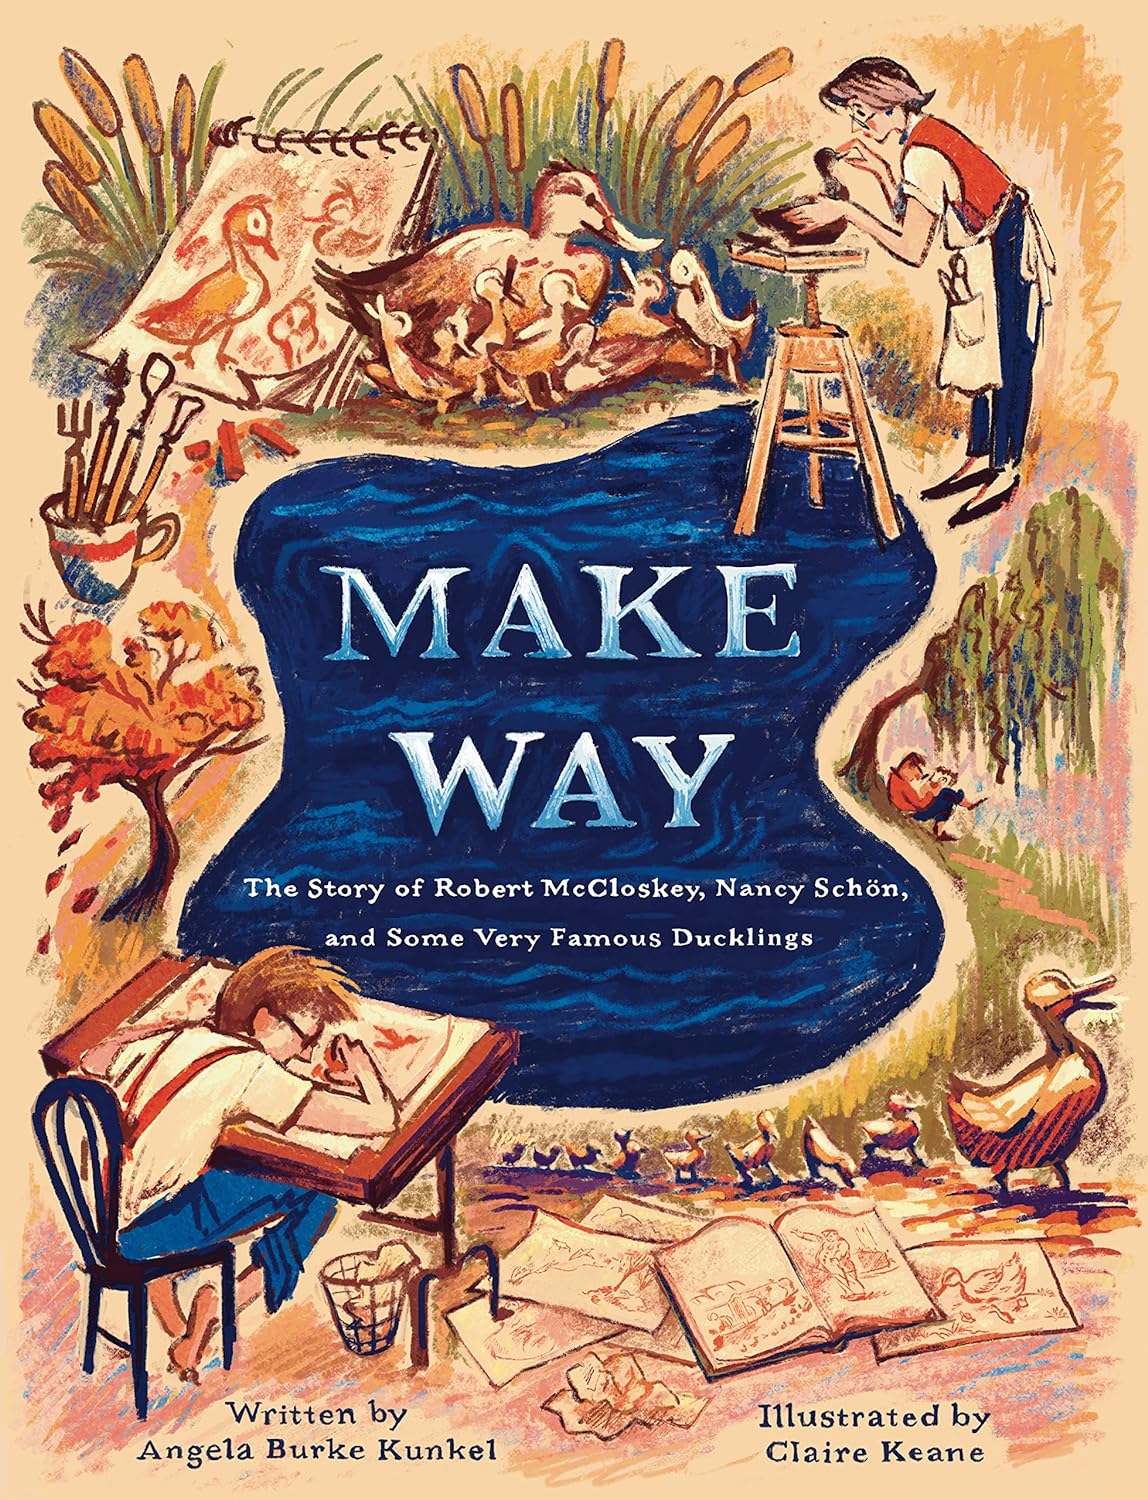 Make Way: The Story of Robert McCloskey, Nancy Schon, and Some Very Famous Ducklings